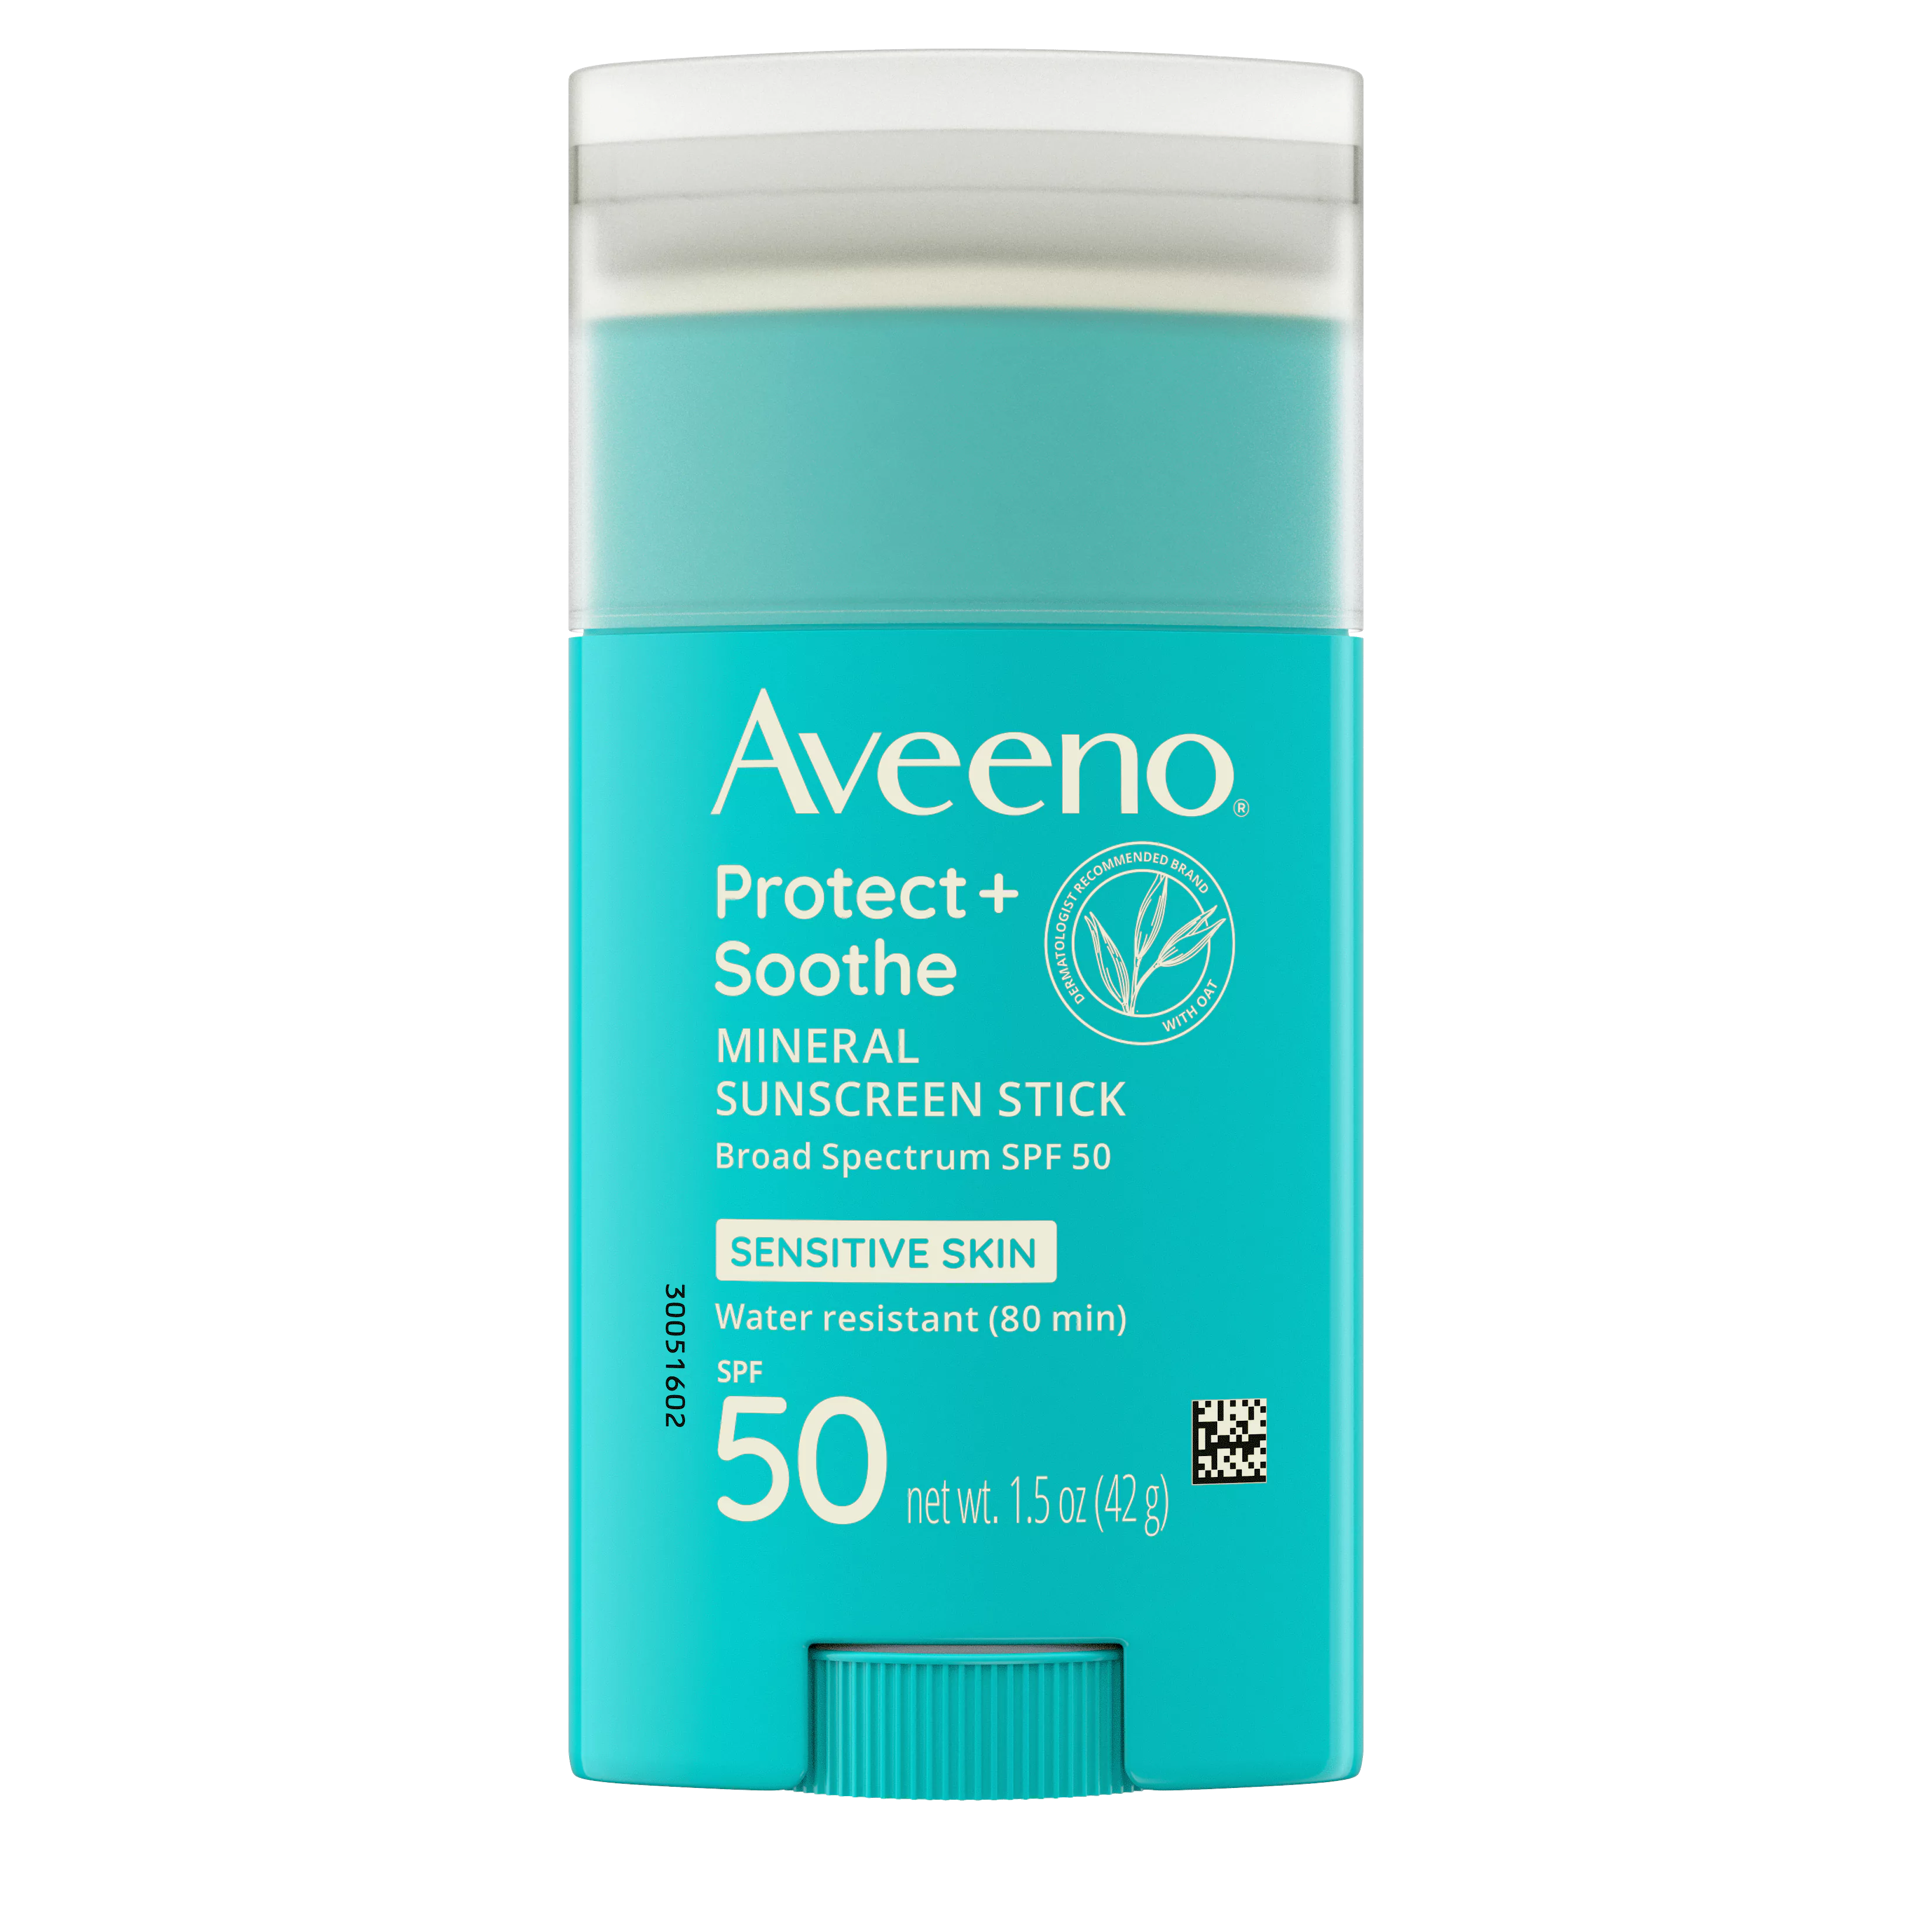 https://www.aveeno.com/sites/aveeno_us_2/files/product-images/ave-381371188444-us-mineral-ss-sunscreen-stick-spf50-15oz-00000-6529891c79f7b.webp